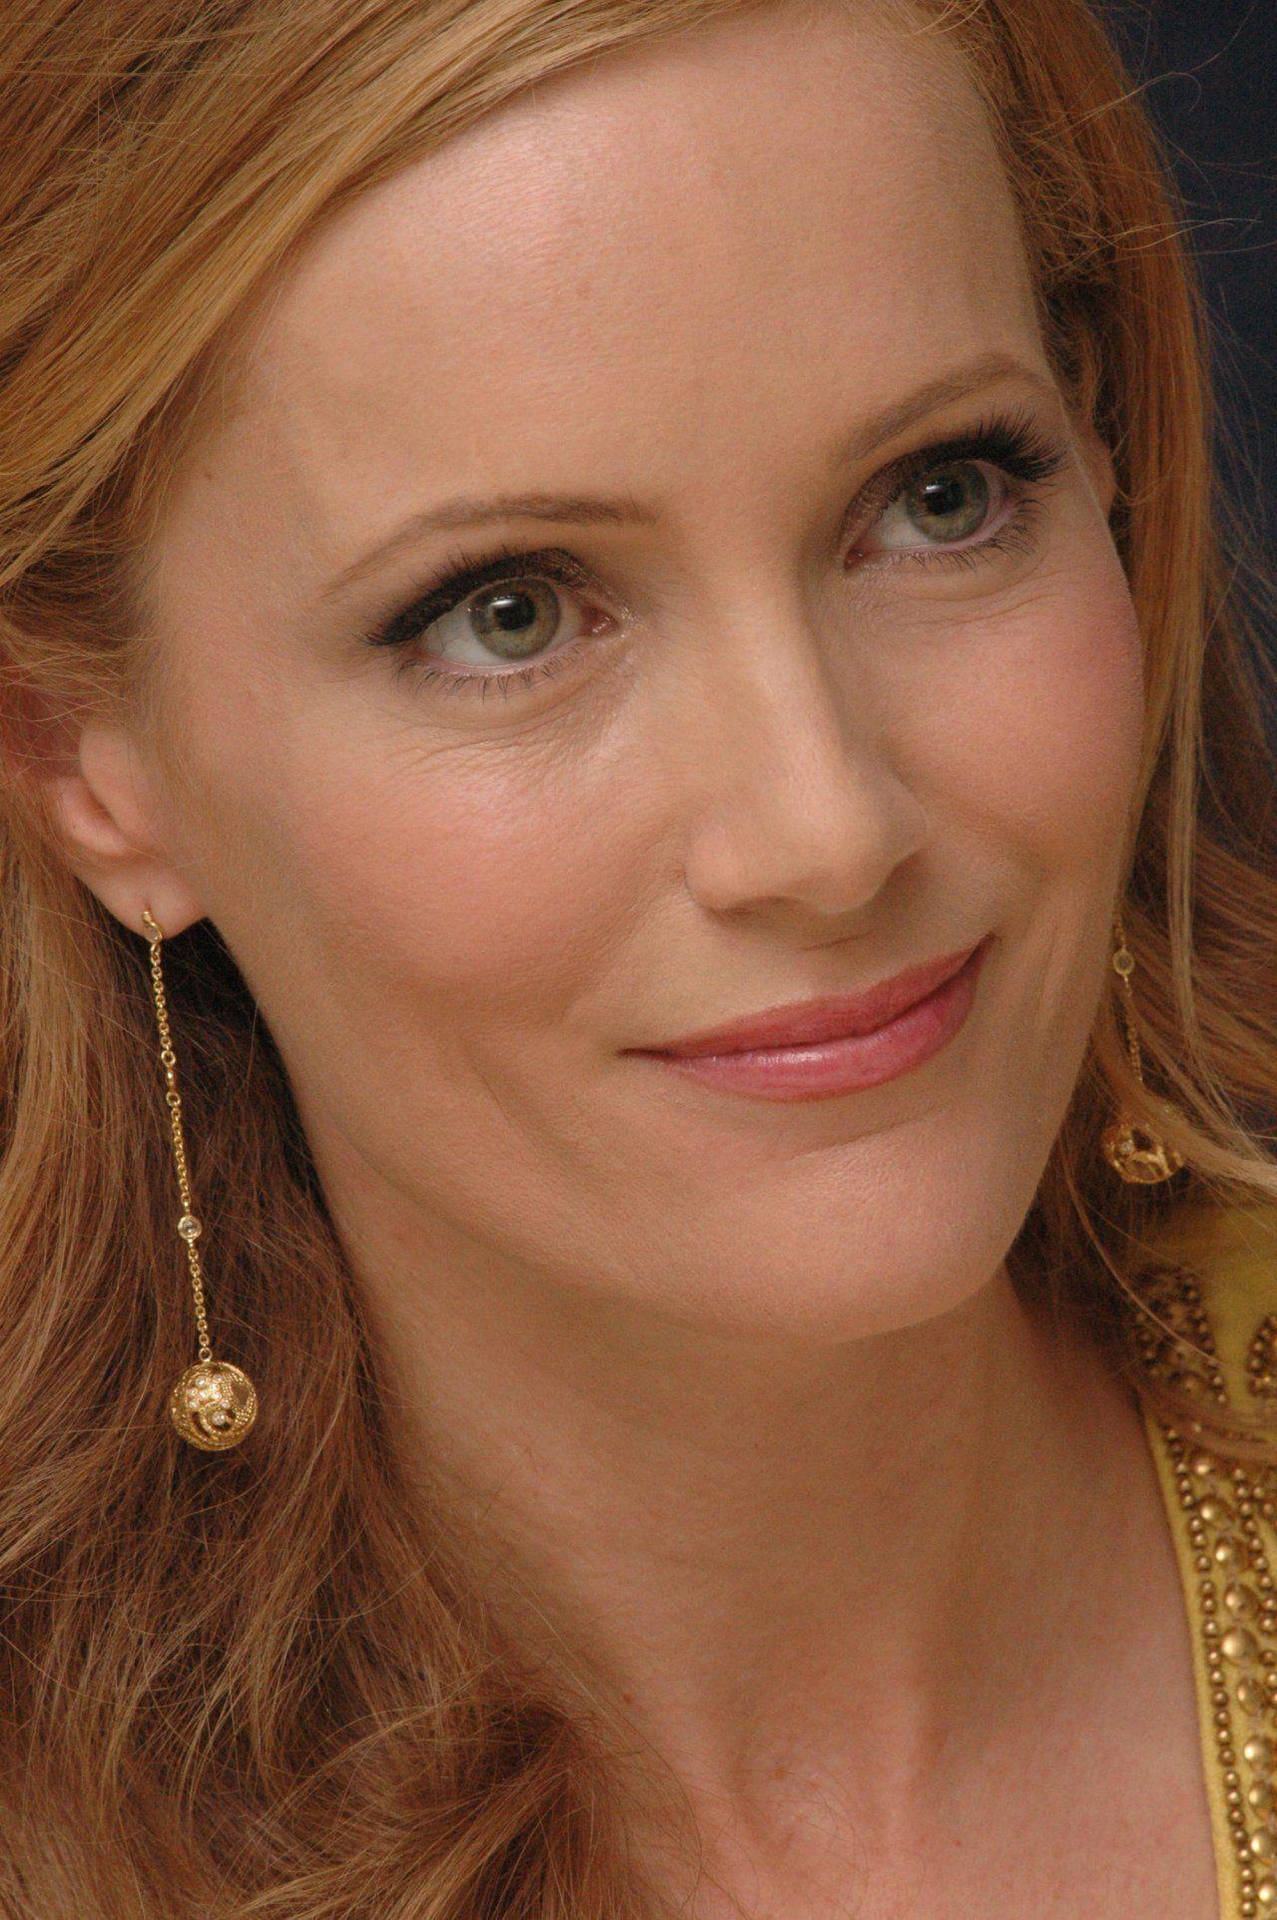 Caption: Radiant Leslie Mann, American Actress In Extreme Close-Up Wallpaper